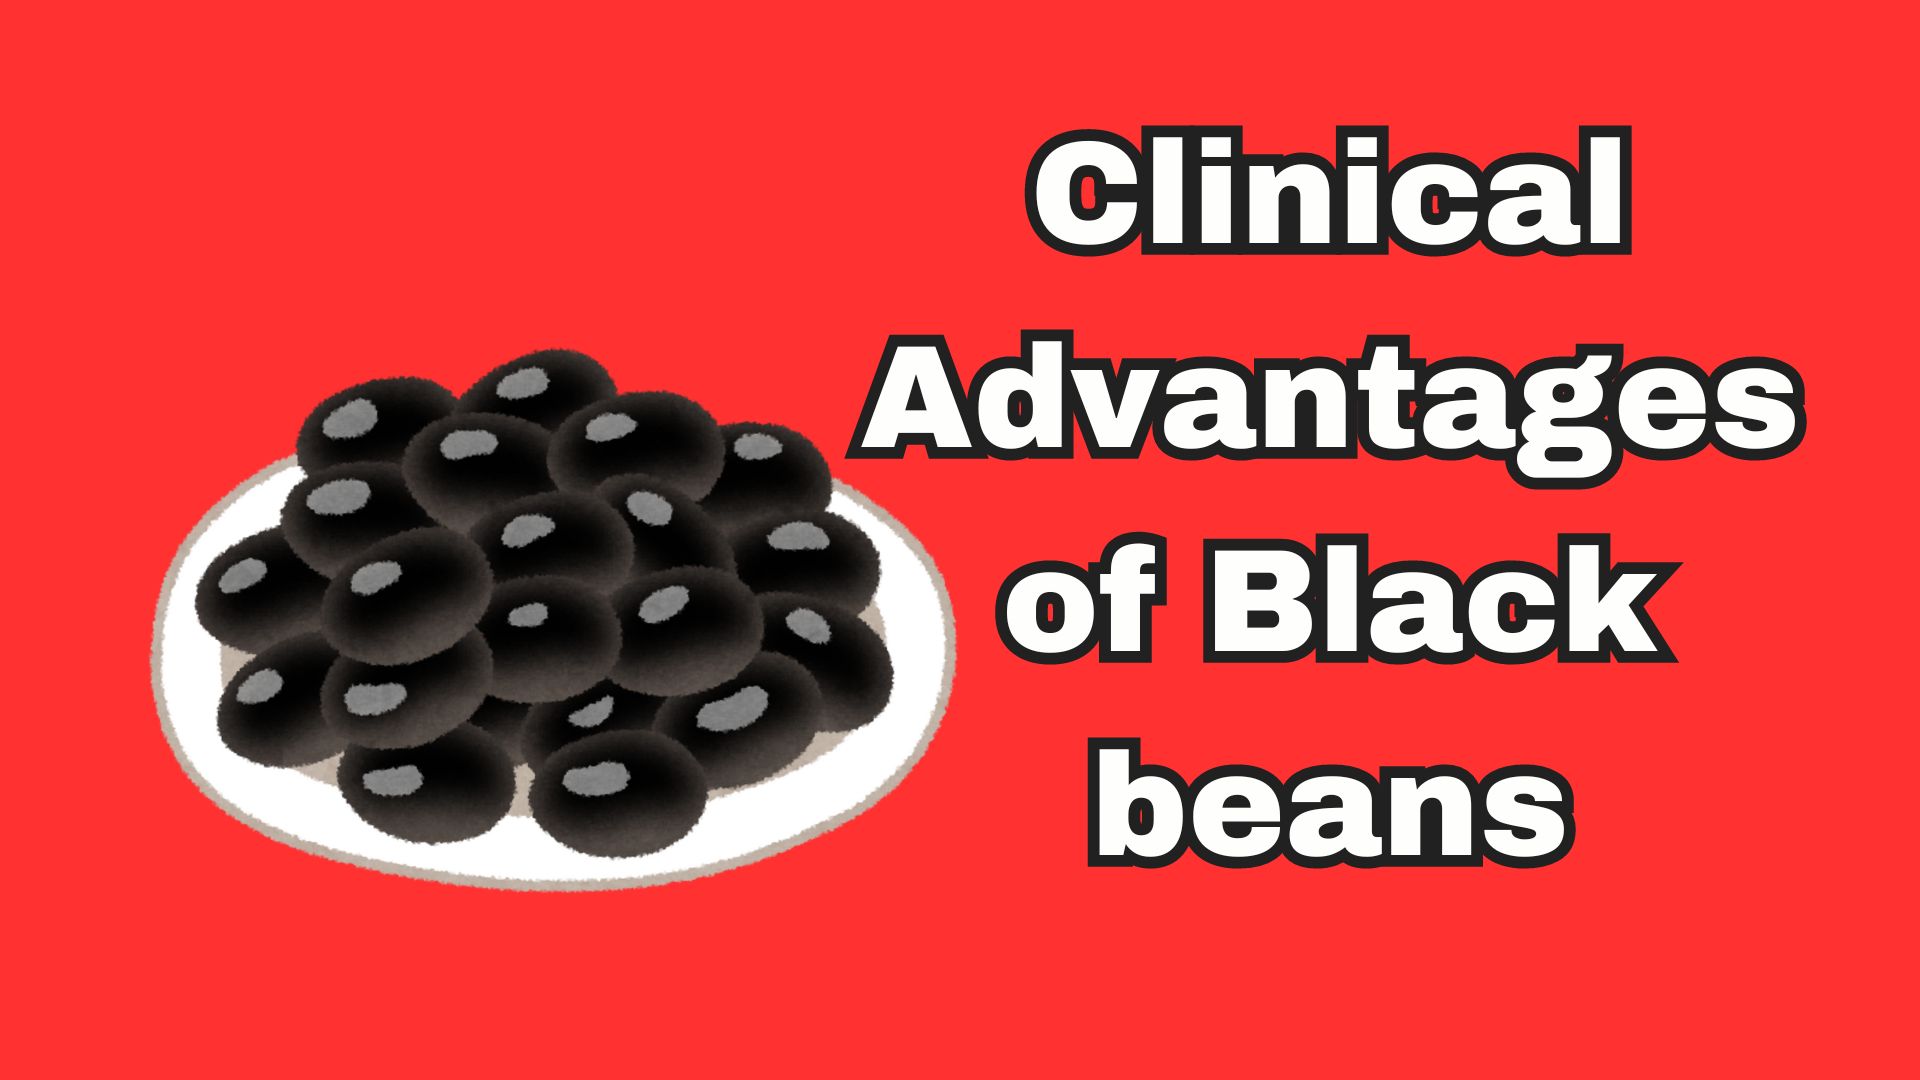 Bean Brilliance: Exploring the Remarkable Clinical Advantages of Black beans